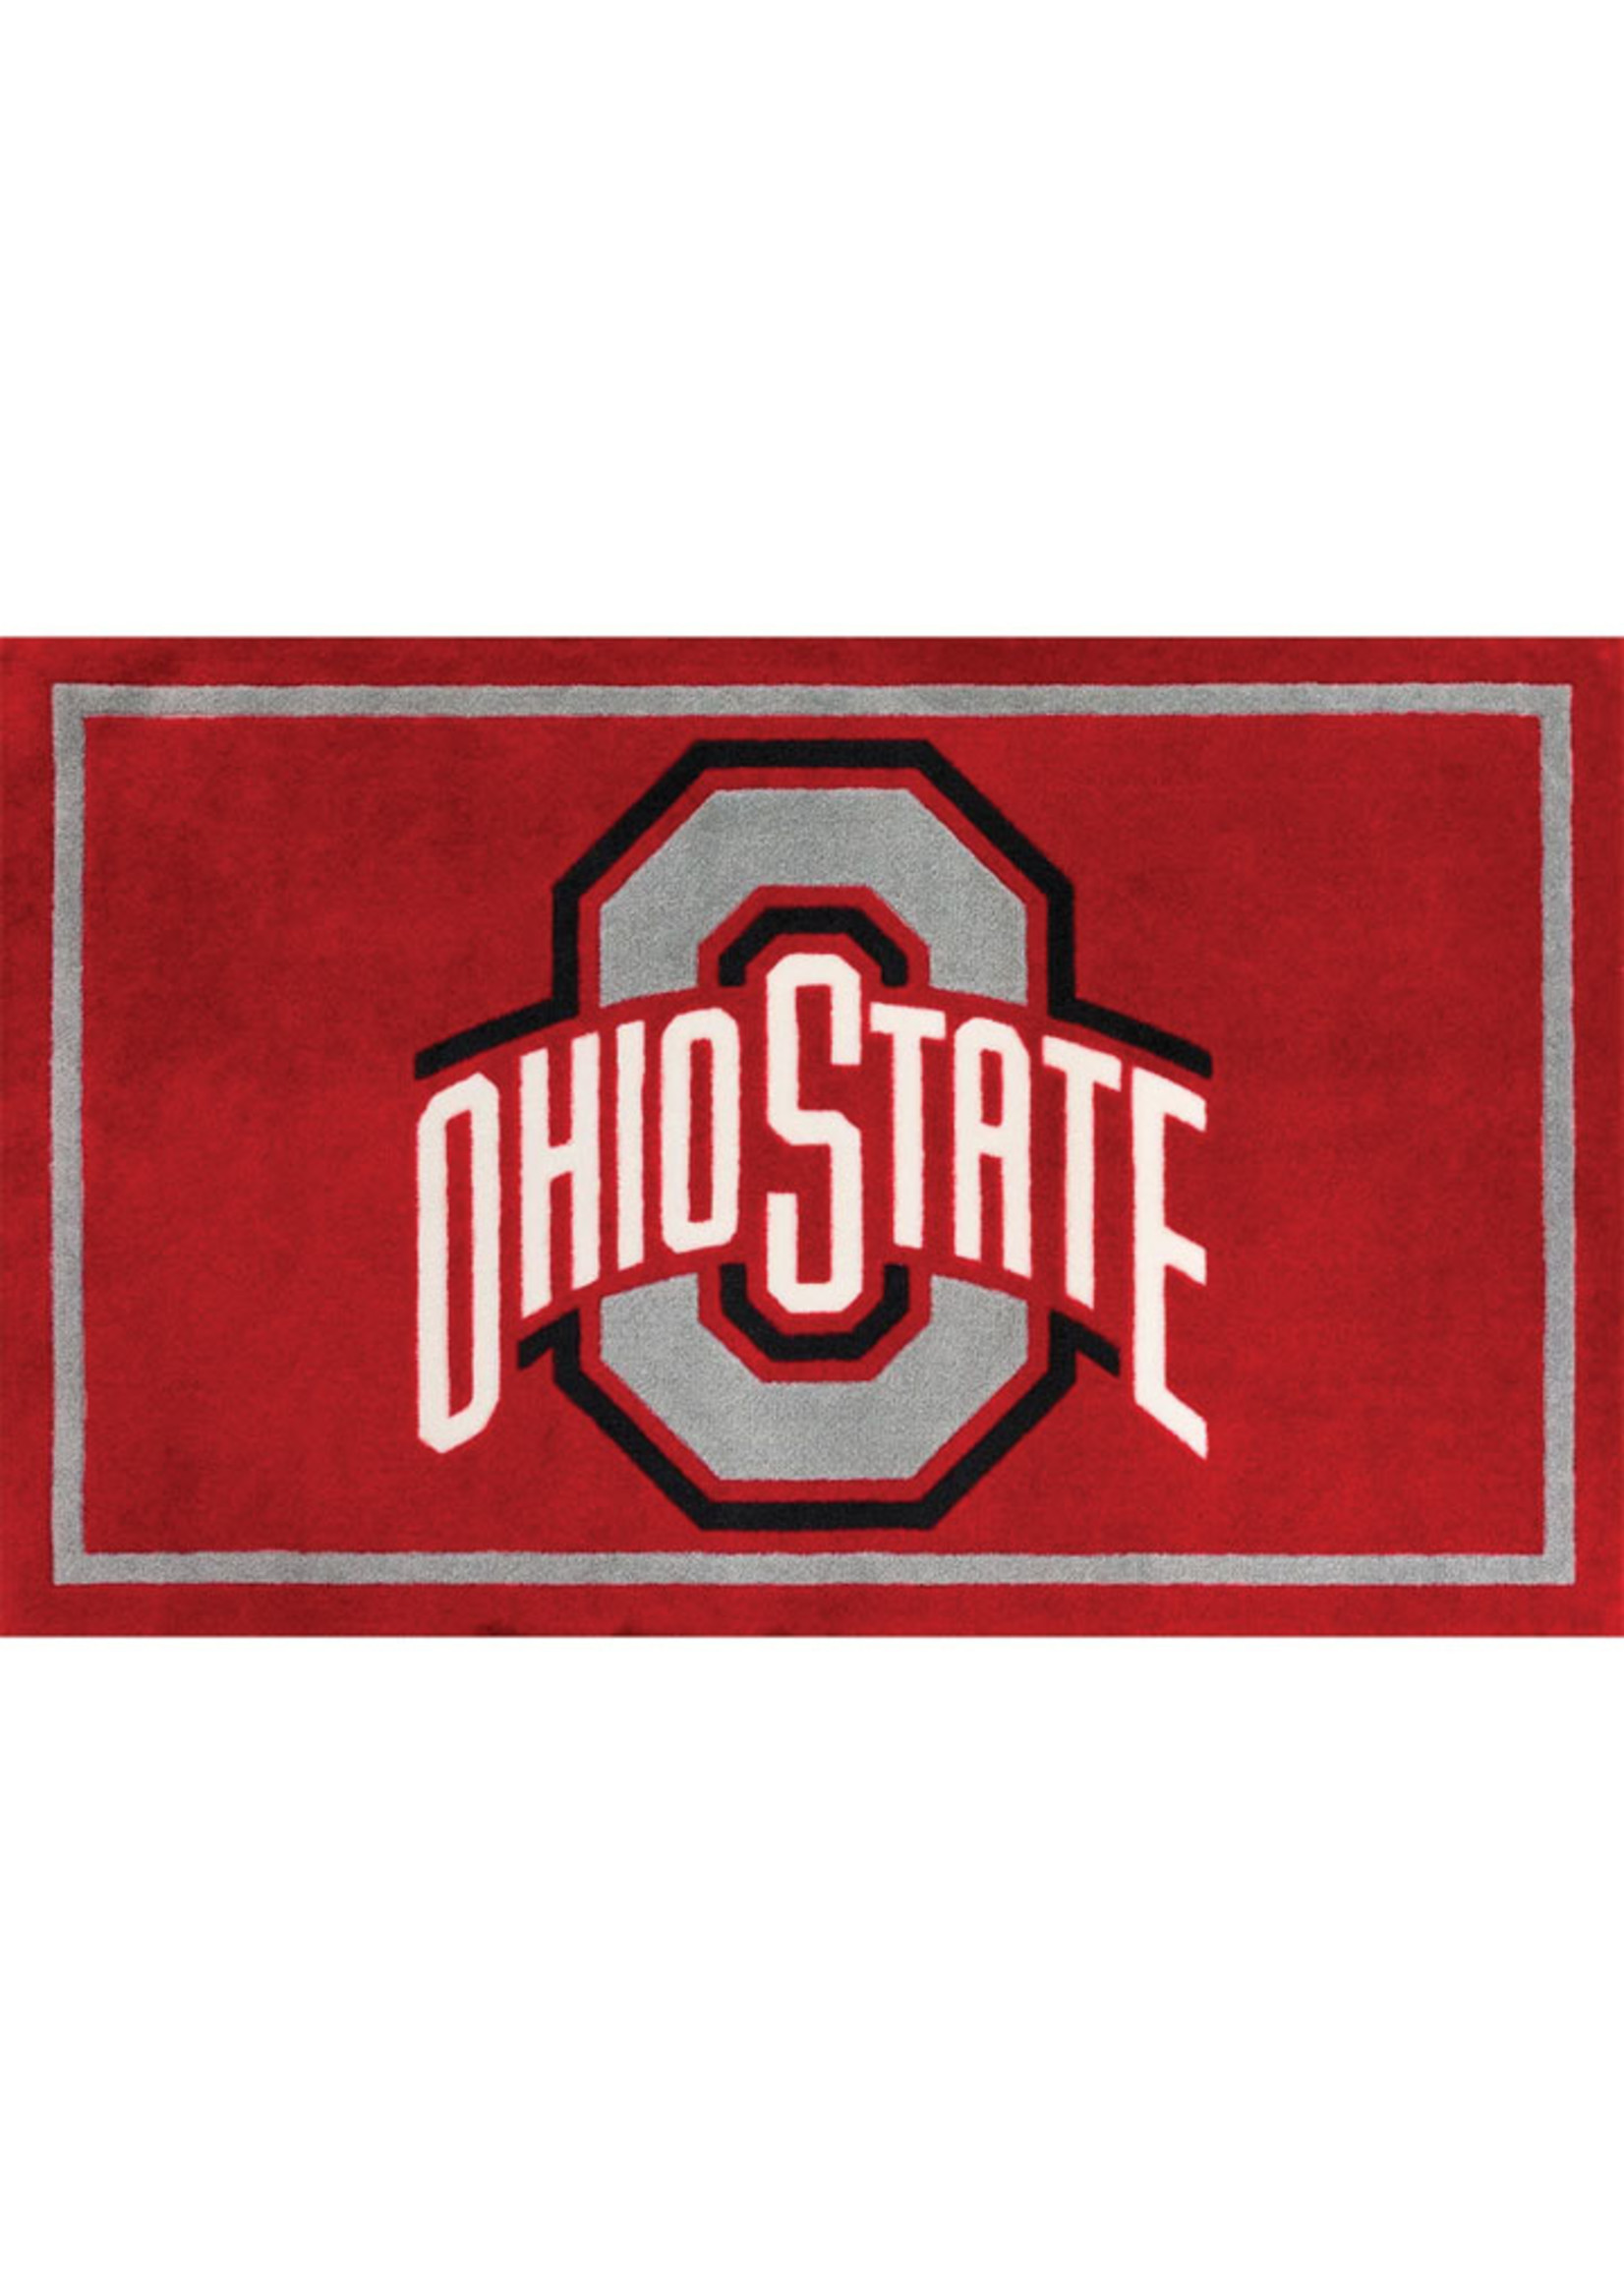 Red 19751 x 5 Ft Area RUG3 Ft Area Rug FANMATS NCAA Ohio State Buckeyes 3 Ft 3 x 5 x 5 Ft